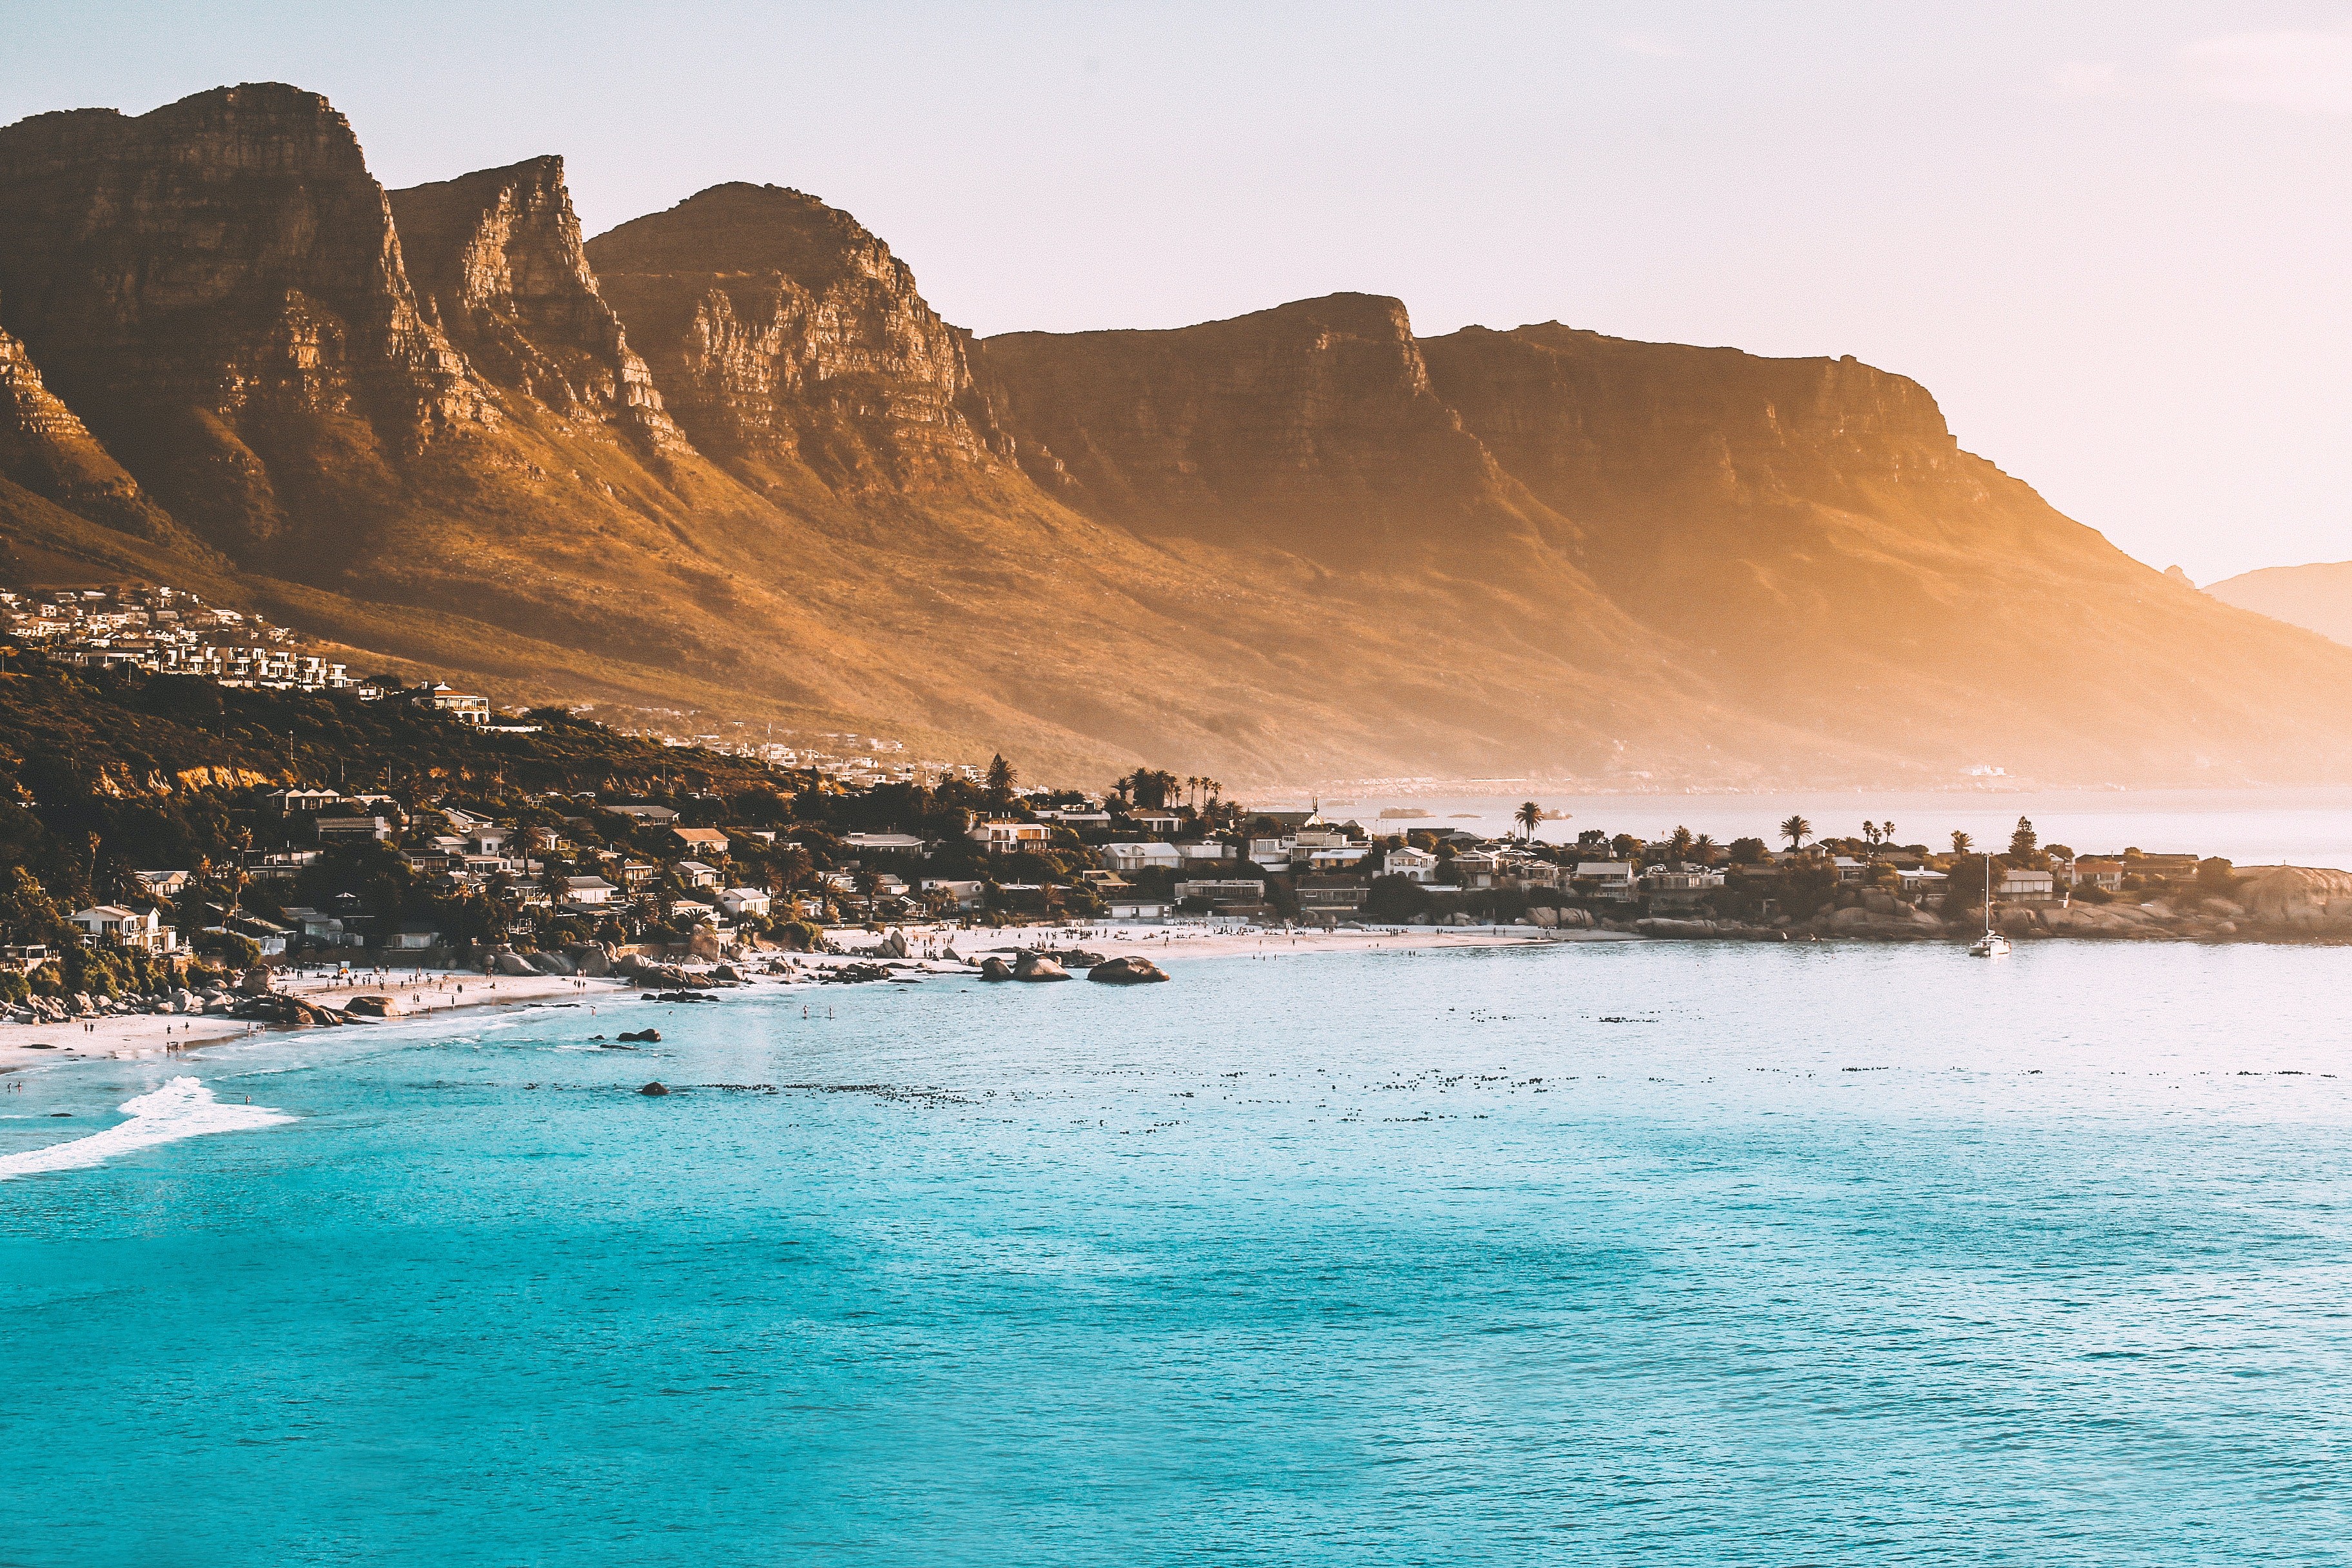 Live your best remote life in Cape Town